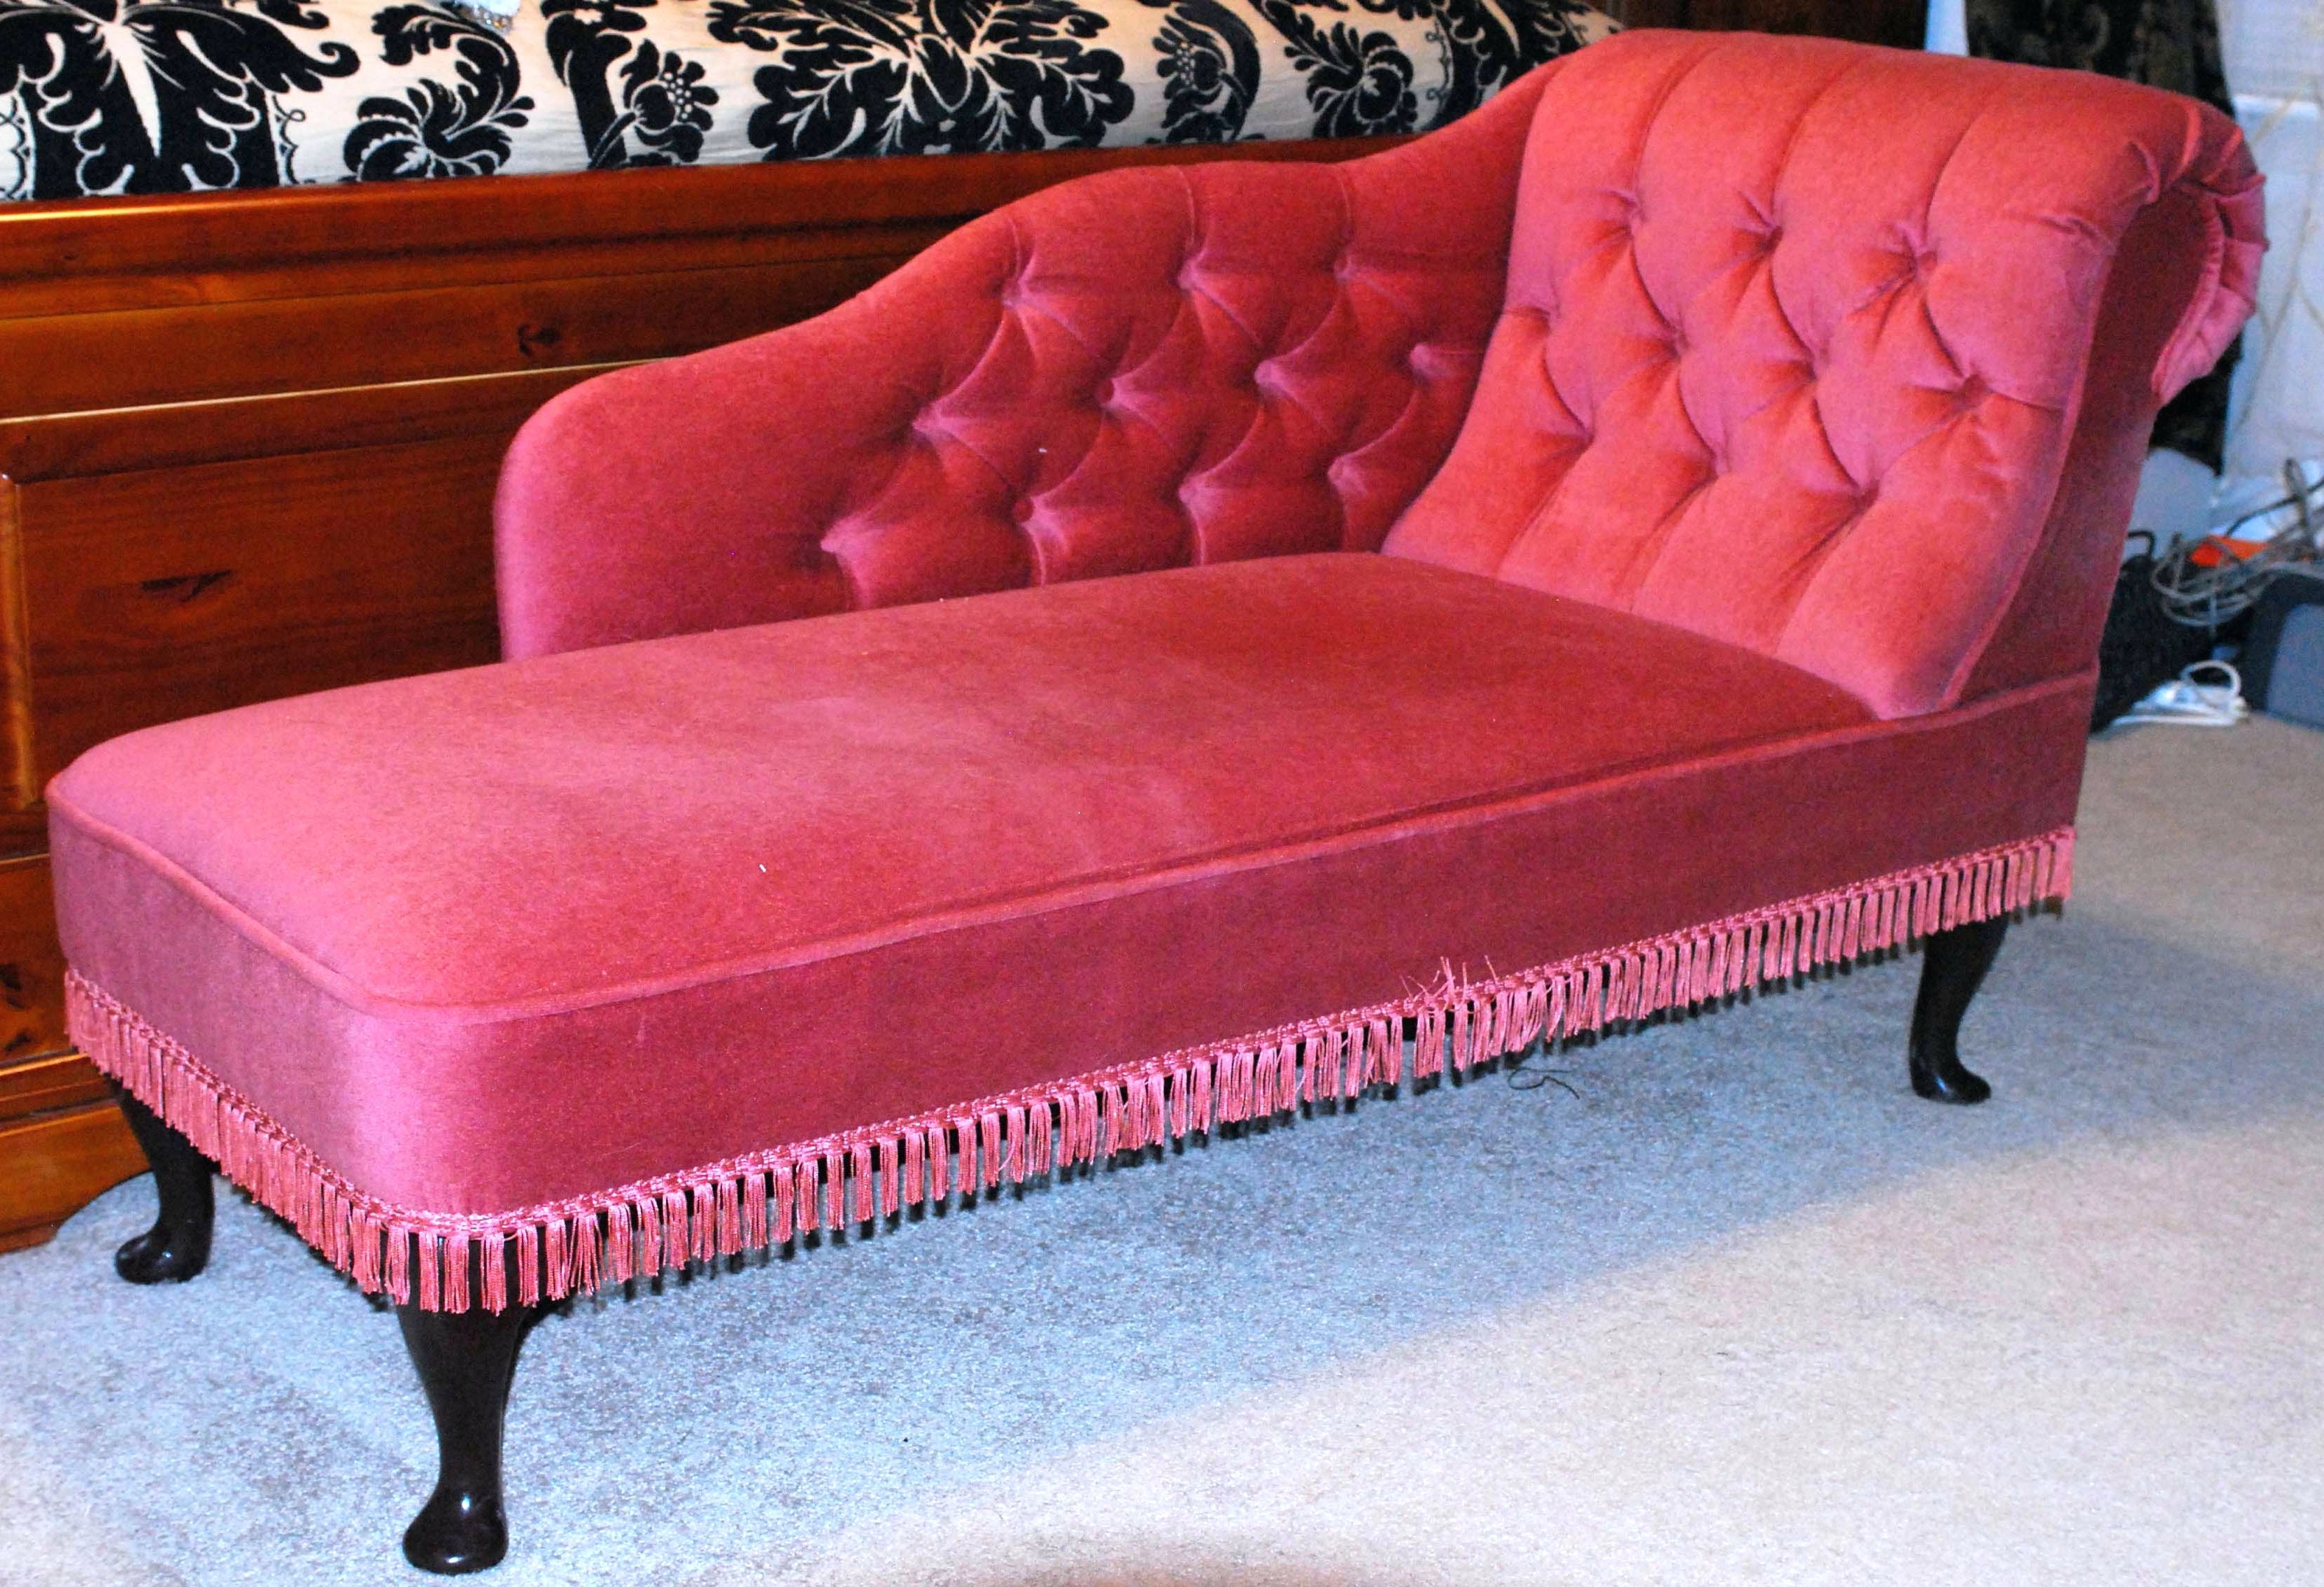 Pink Chaise Lounge Chair • Lounge Chairs Ideas With Latest Pink Chaise Lounges (View 7 of 15)